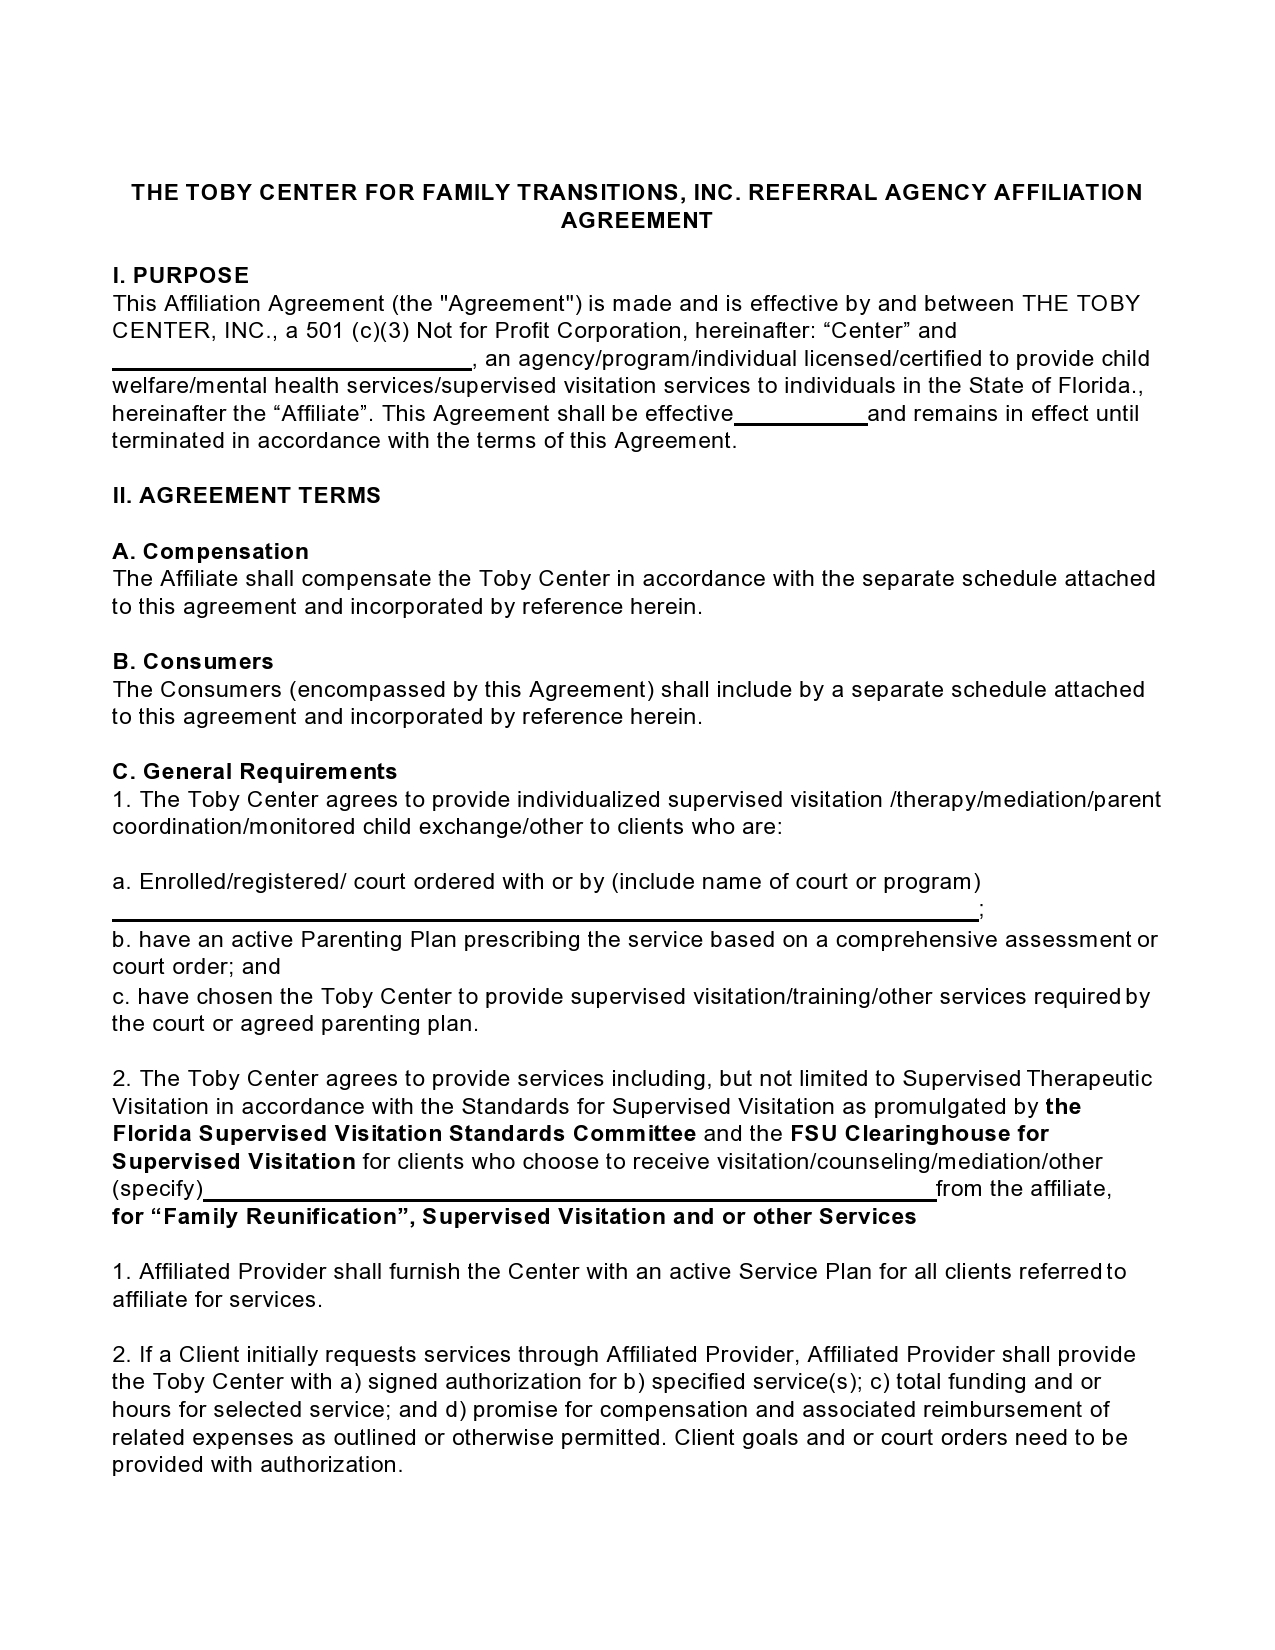 Free affiliate agreement 41